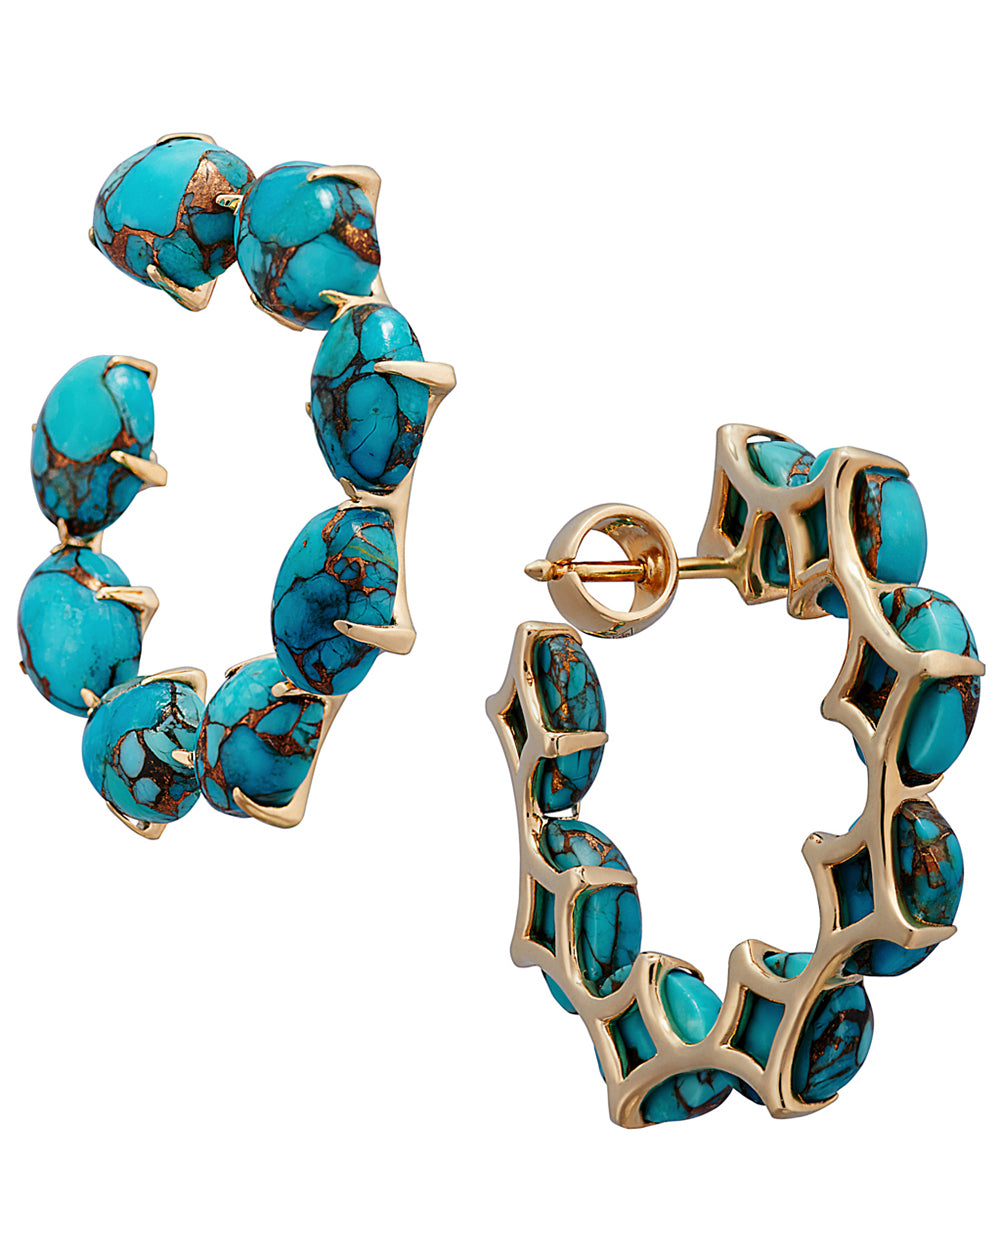 OC05 Earrings with turquoise